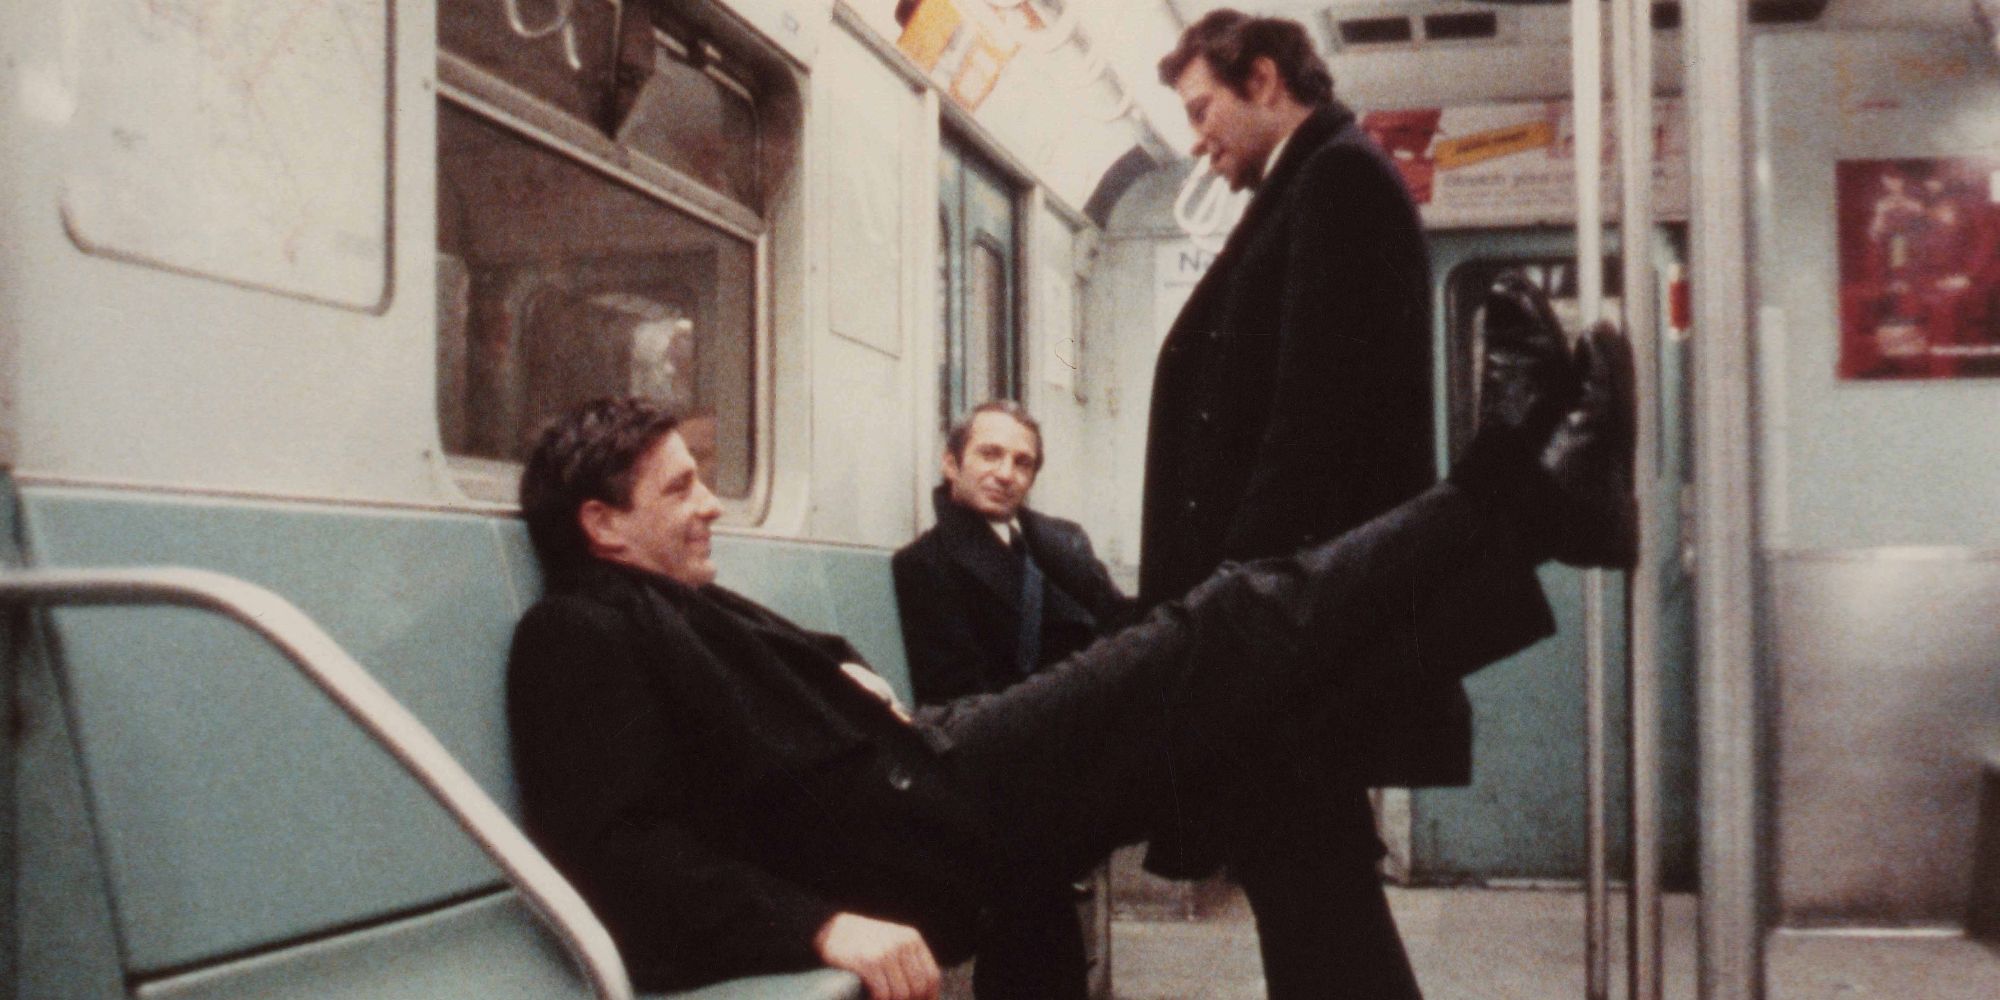 Ben Gazzara, Peter Falk, and John Cassavetes as Harry, Archie, and Gus riding the subway in Husbands.